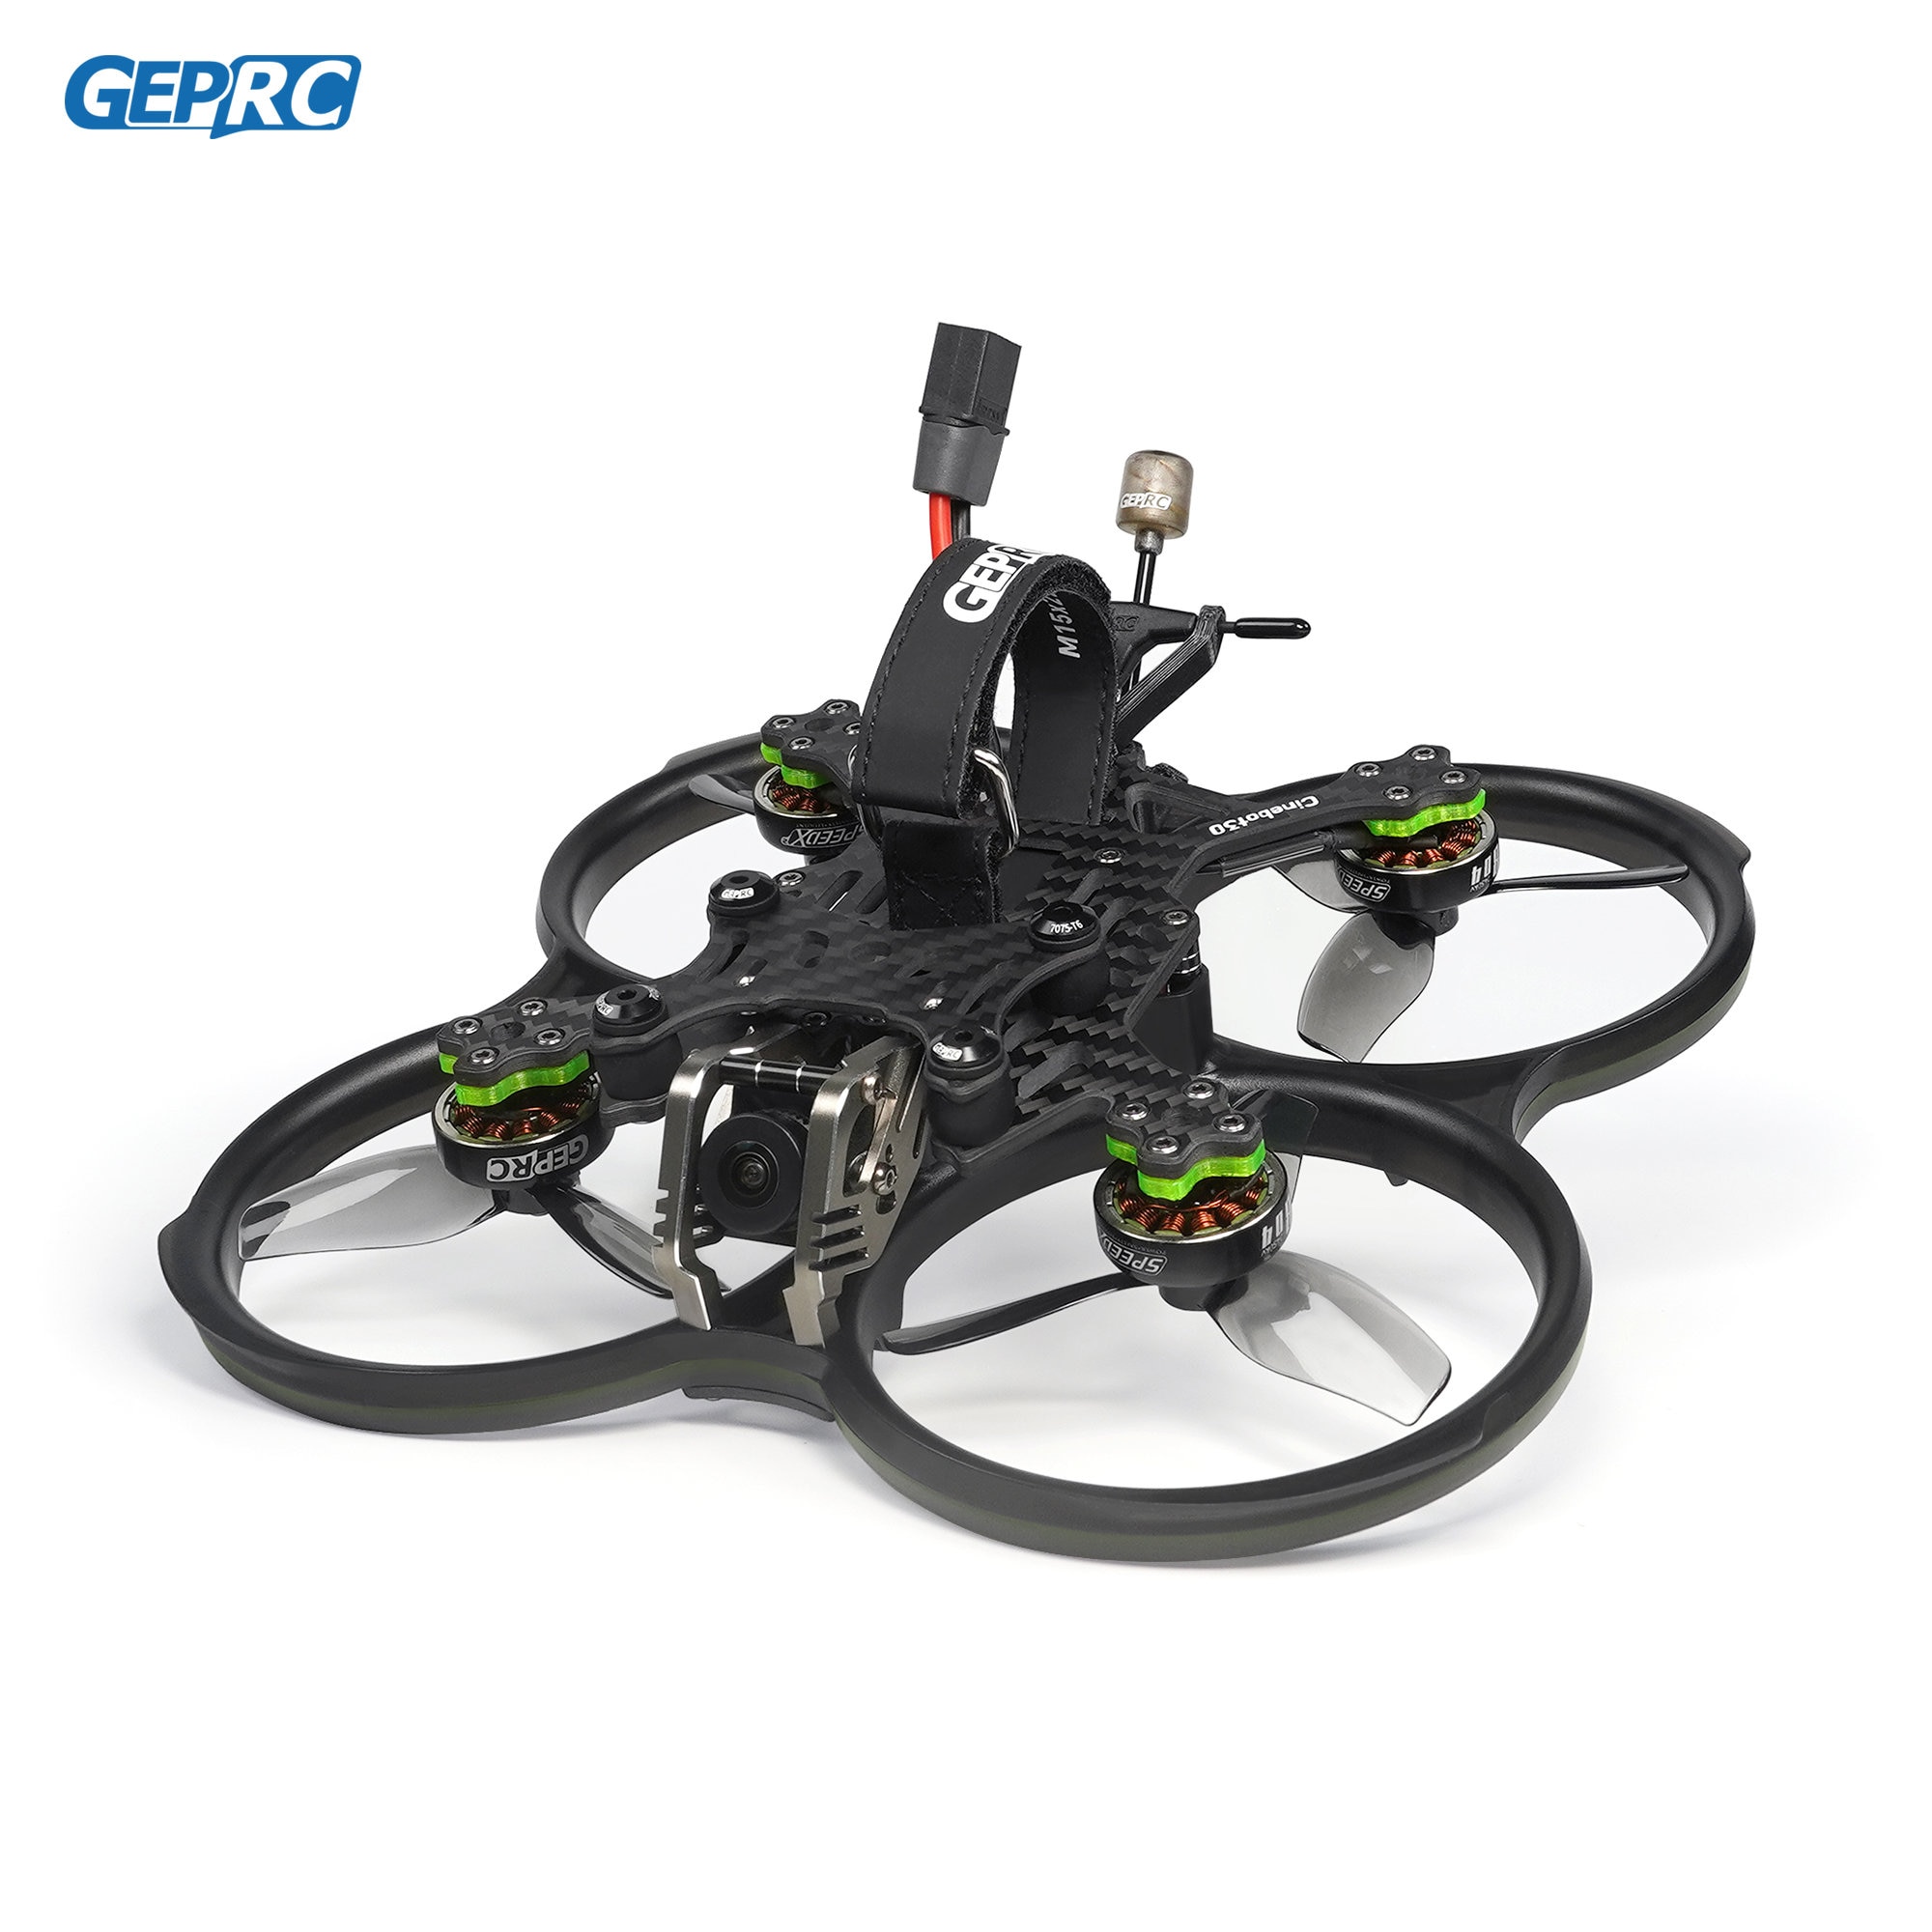 GEPRC Cinebot30 Analog 4S 6S Ultralight FPV Racing Drone TBS Nano RX / Caddx Ratel 2 GEP-F722-45A AlO V2 for RC FPV Quadcopter